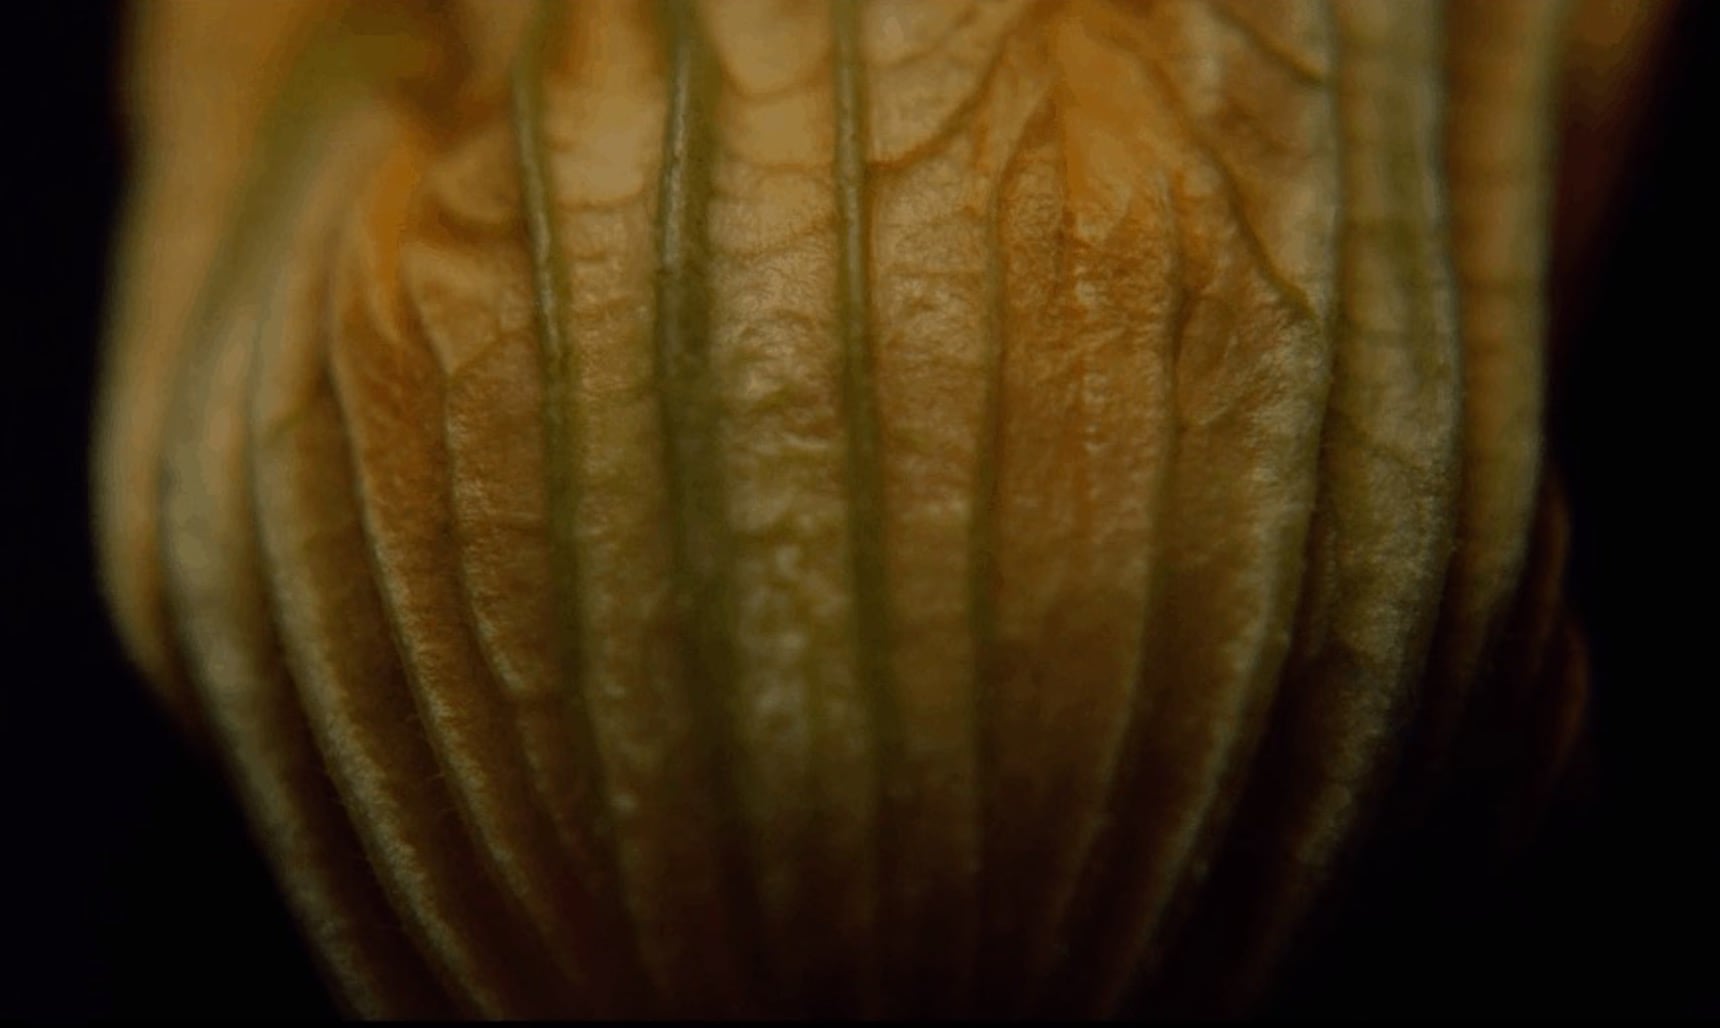 Detail of Physalis Peruviana on a black background